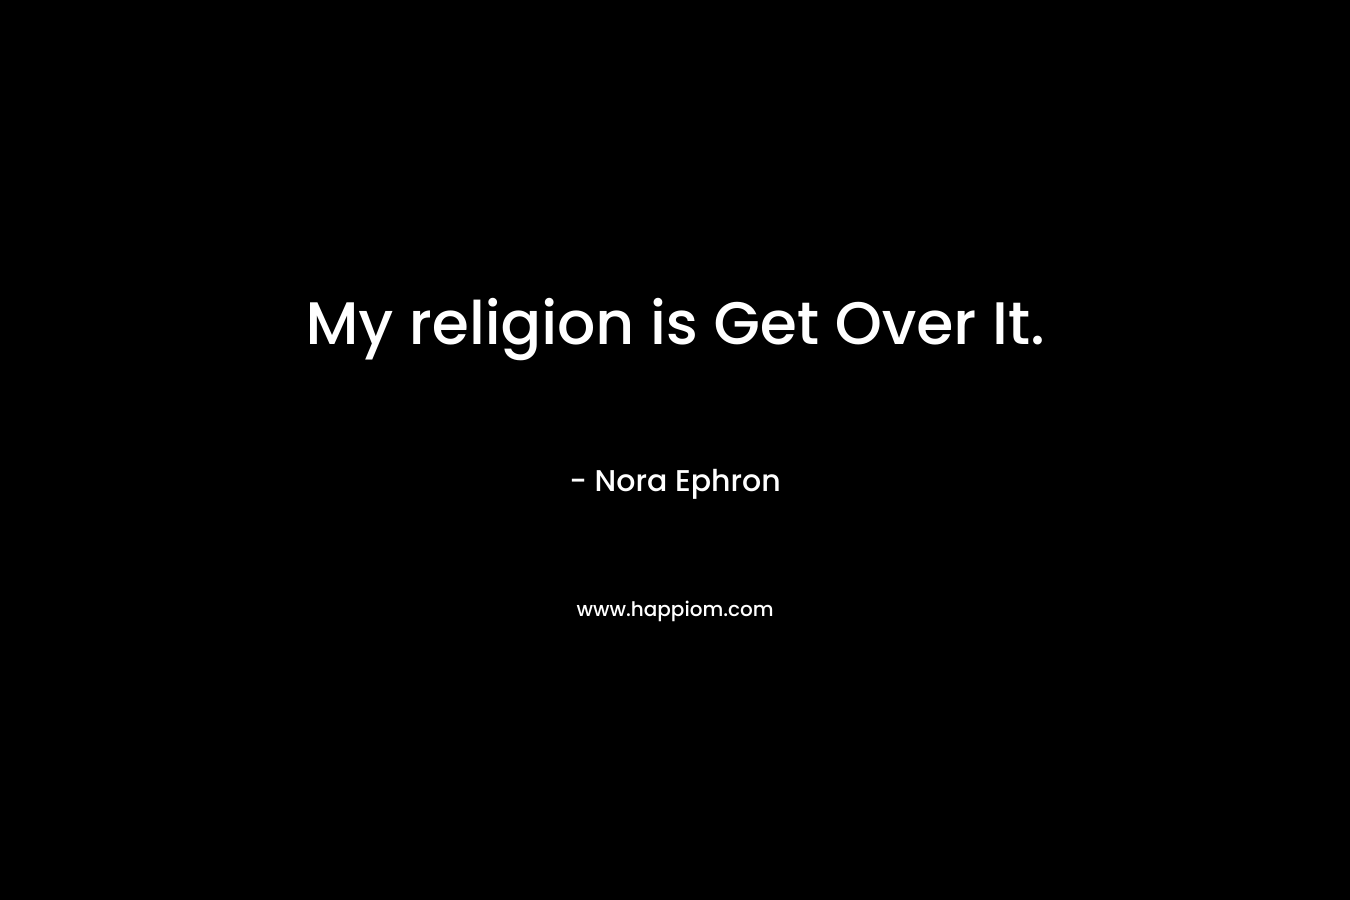 My religion is Get Over It.